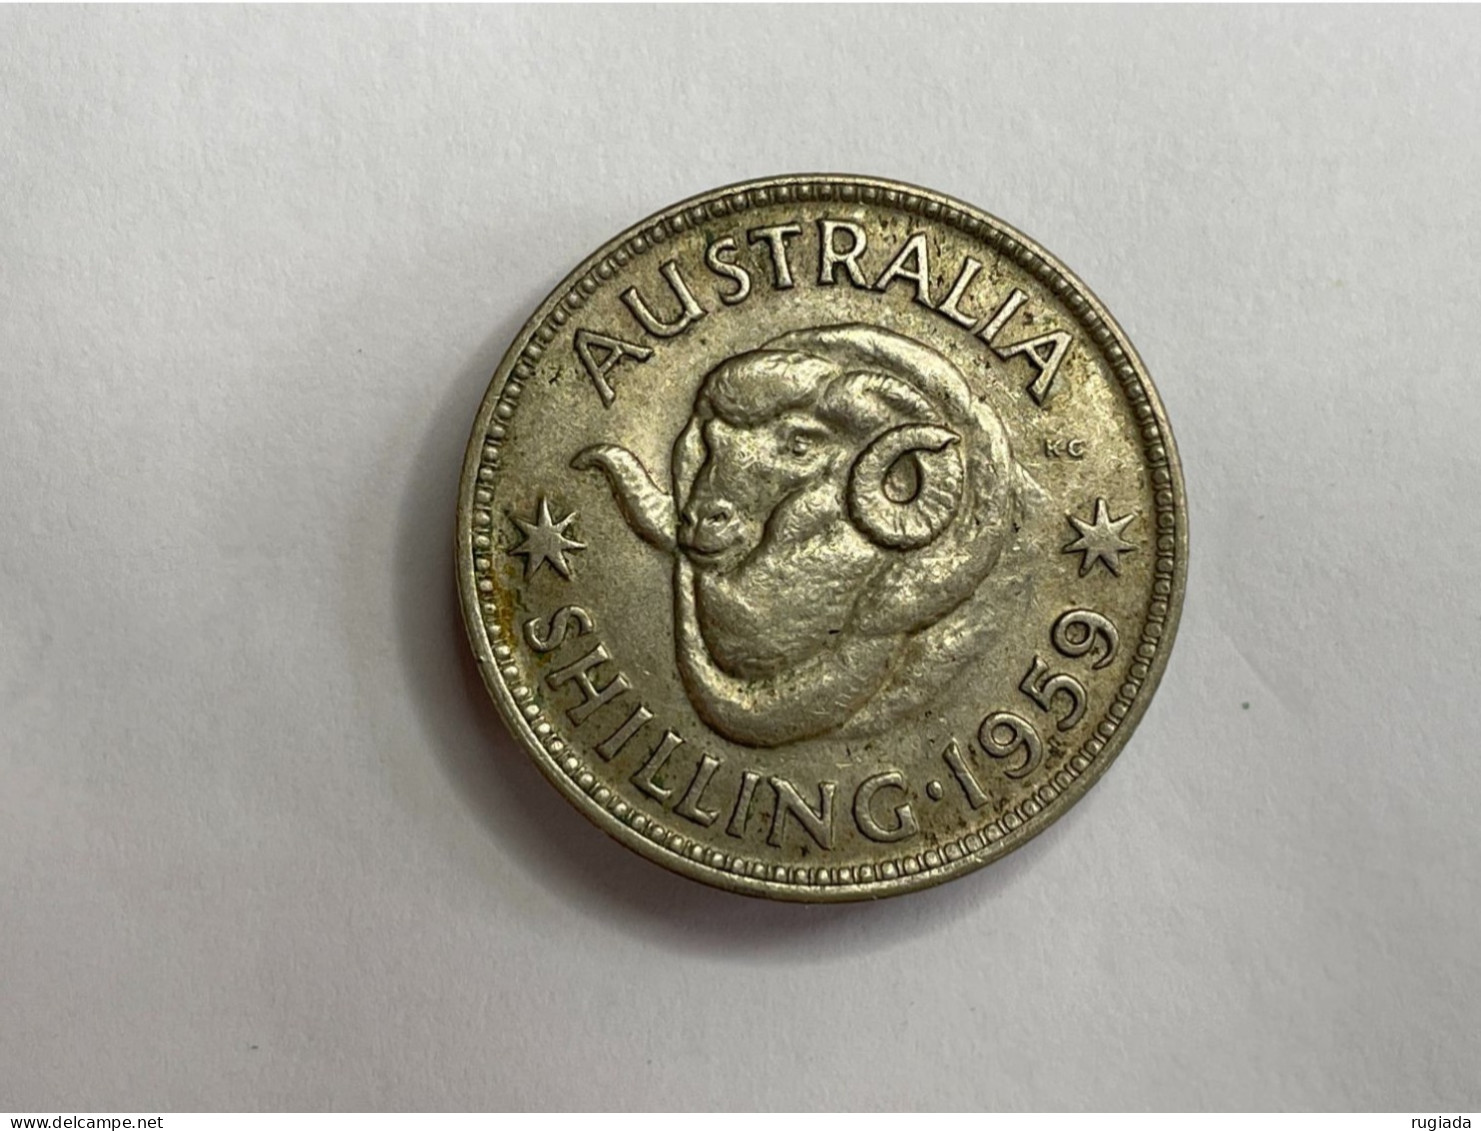 1959 Australia Shilling Coin, Silver 0.5, XF Extremely Fine - Shilling